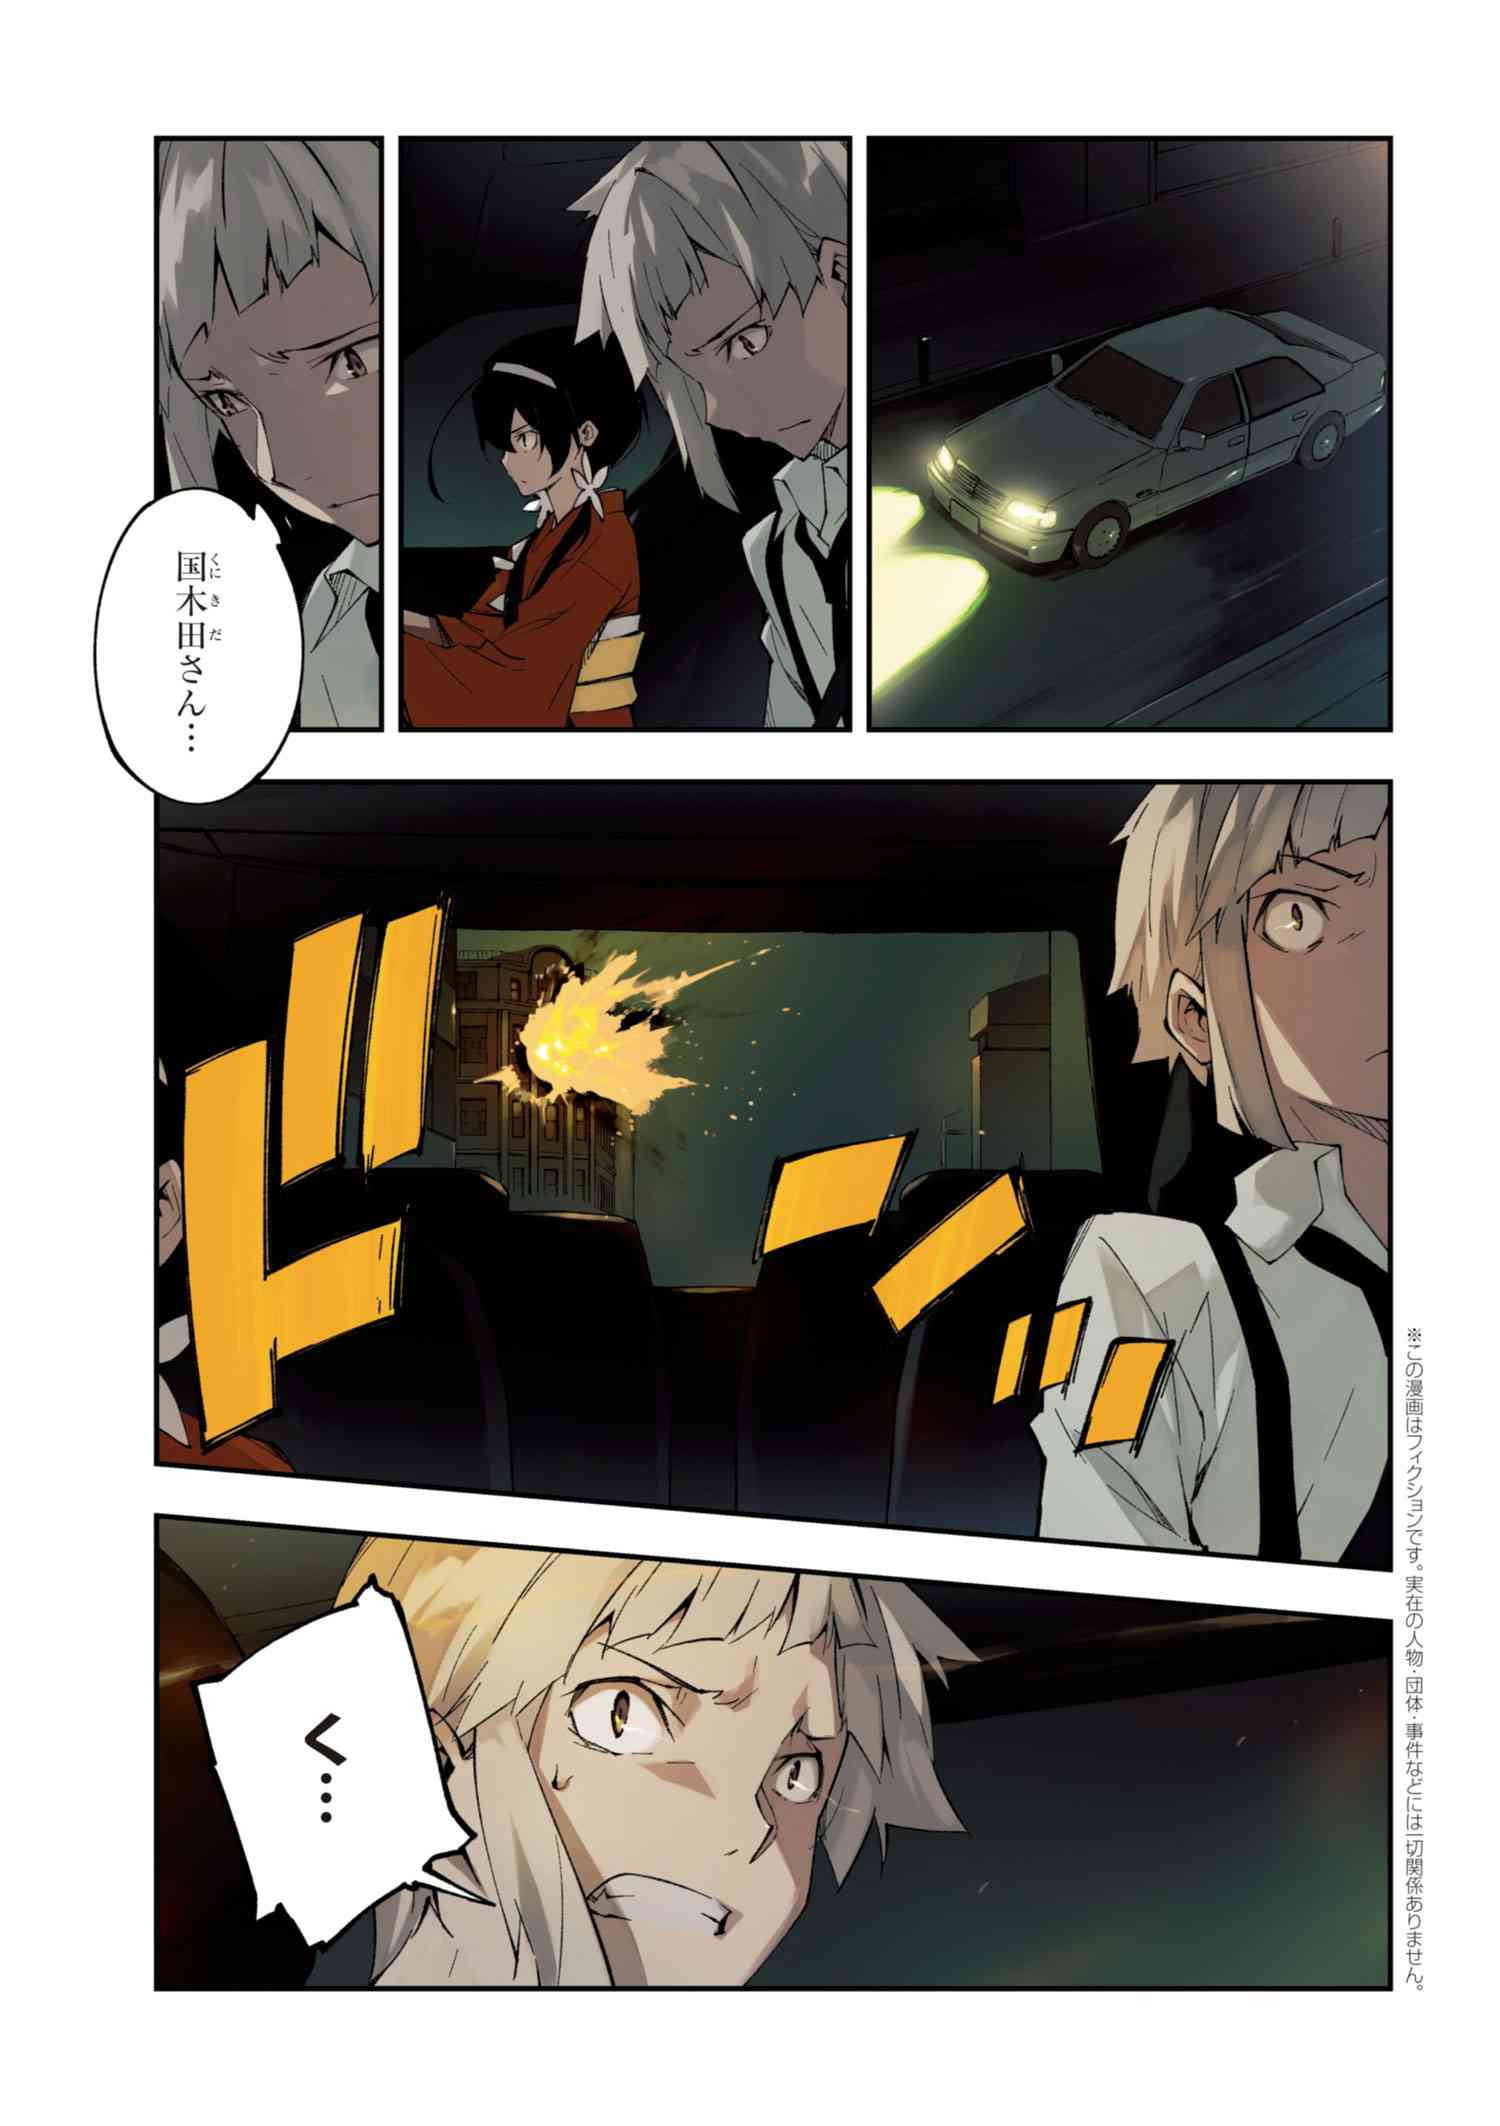 Bungou Stray Dogs: Dead Apple - Chapter 4-1 - Page 1